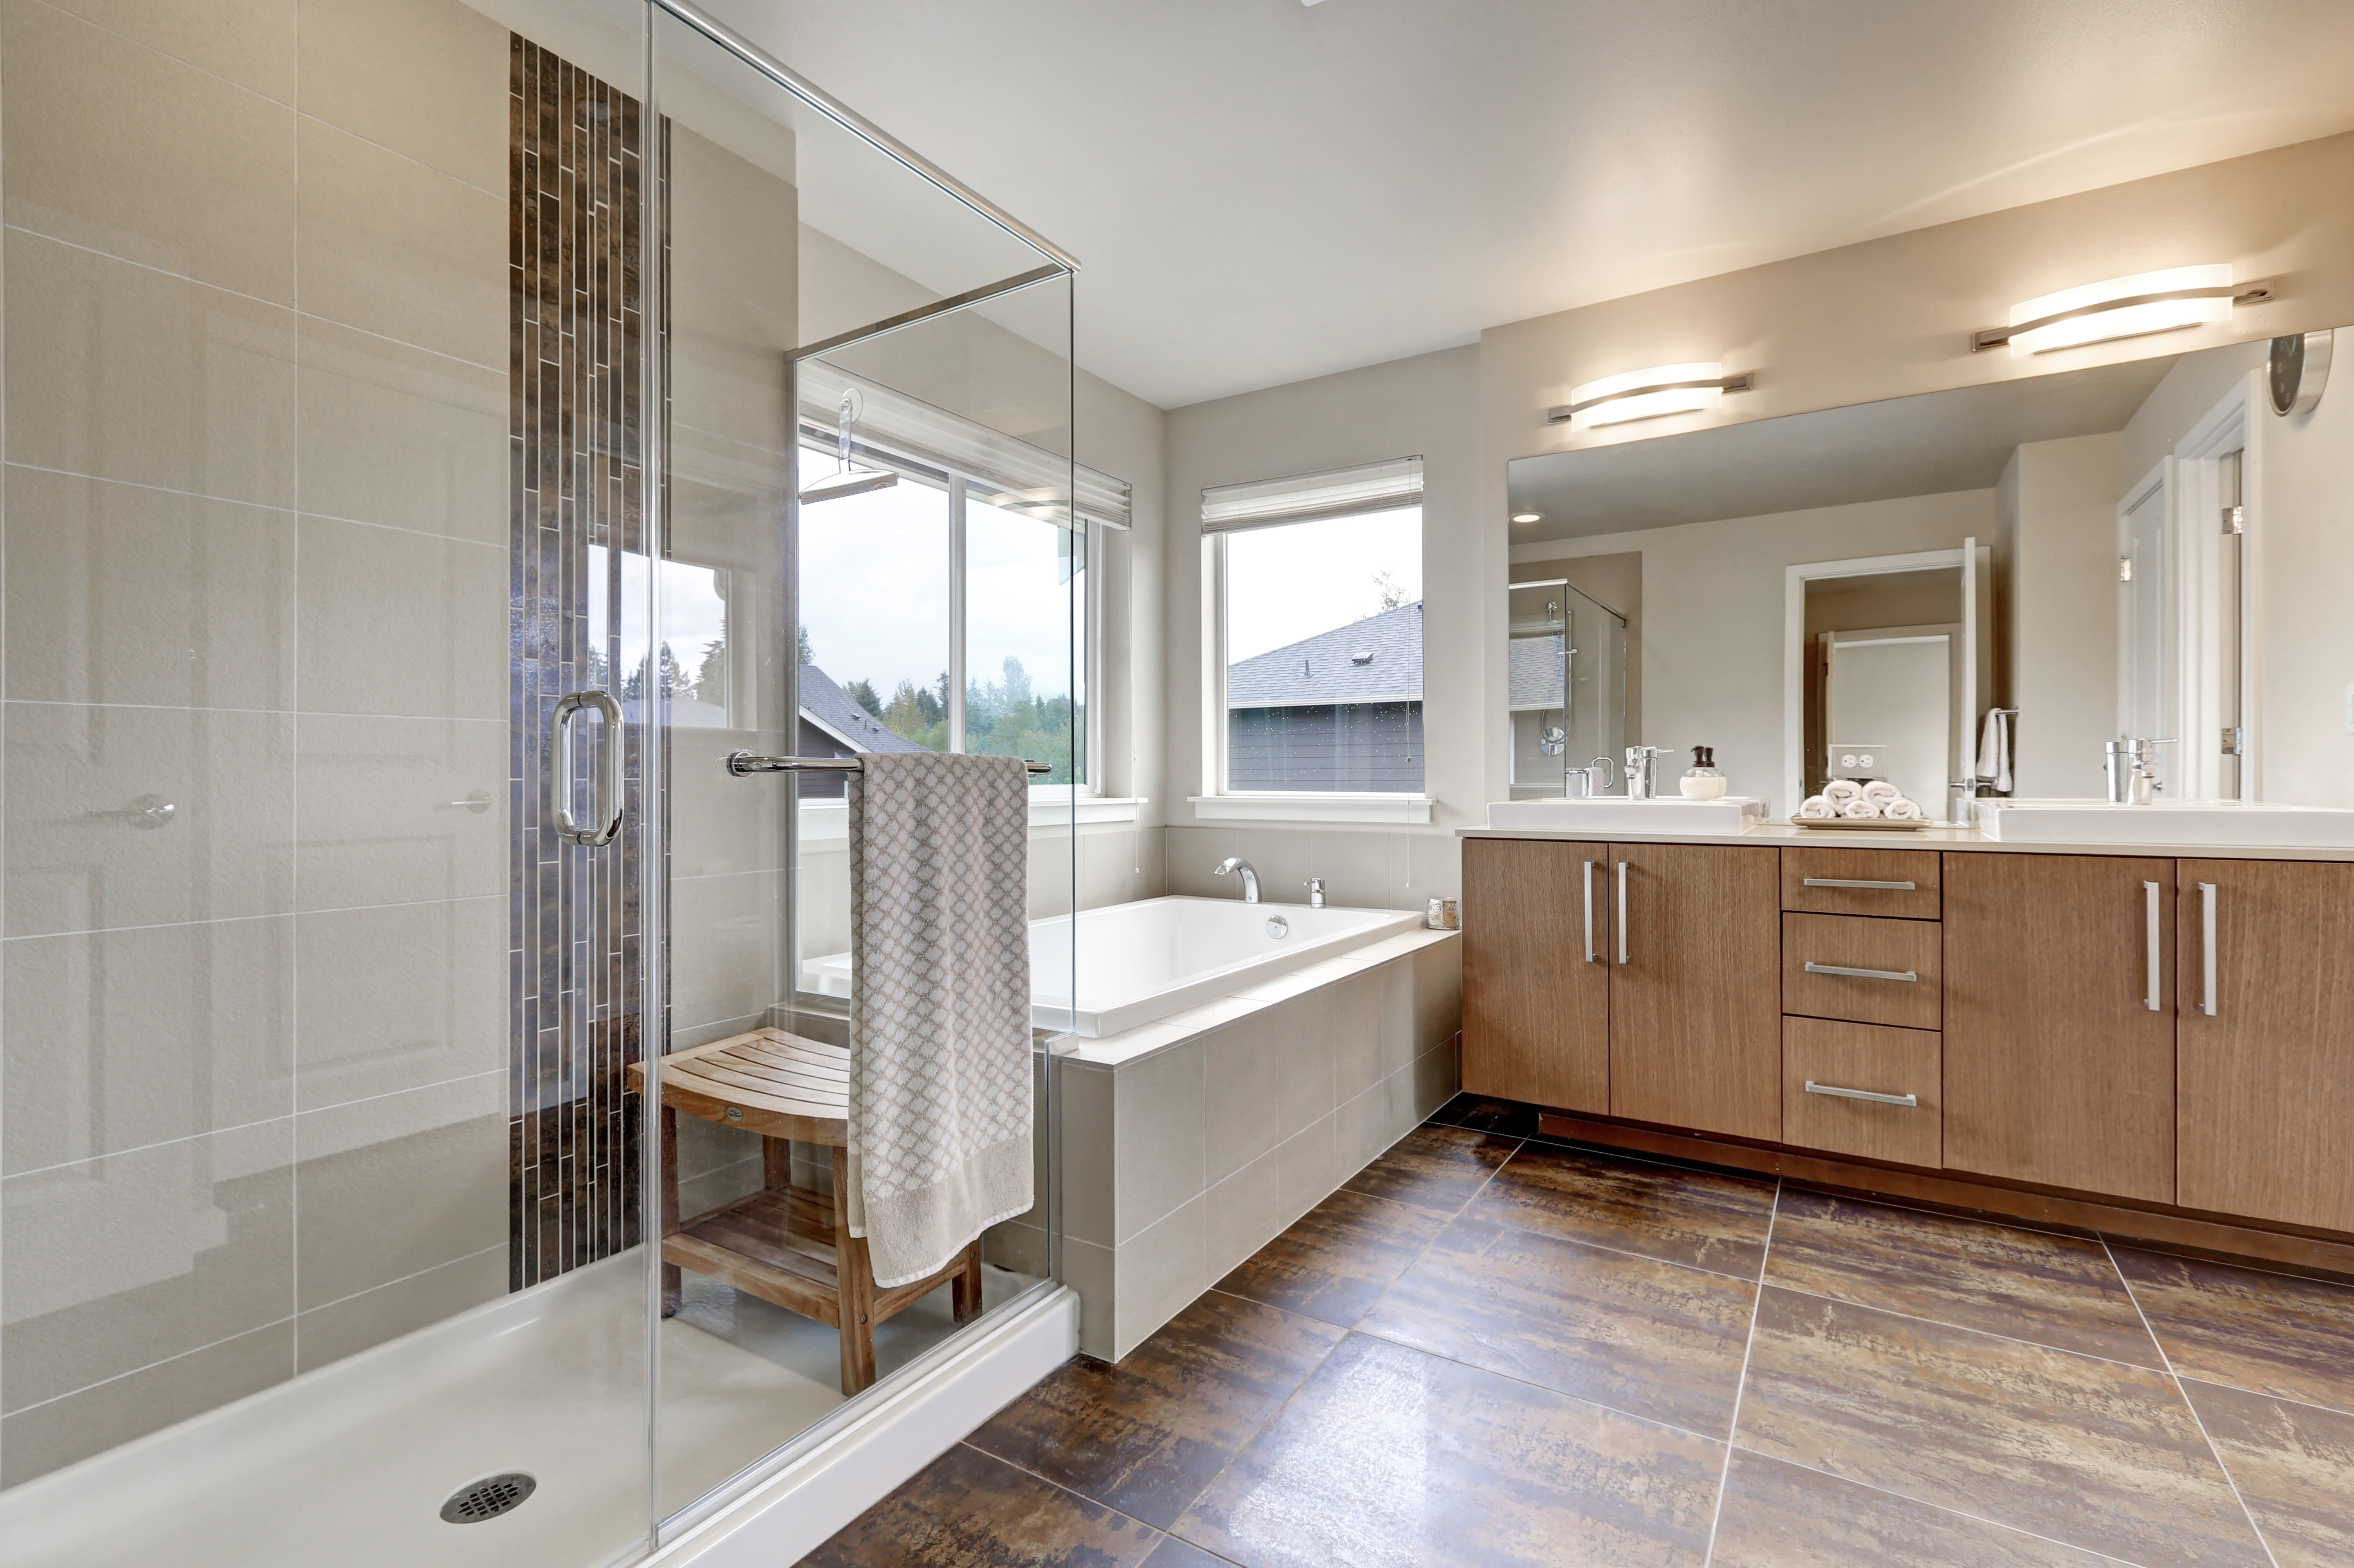 Large floor to ceiling bathroom vanity and a white bathtub